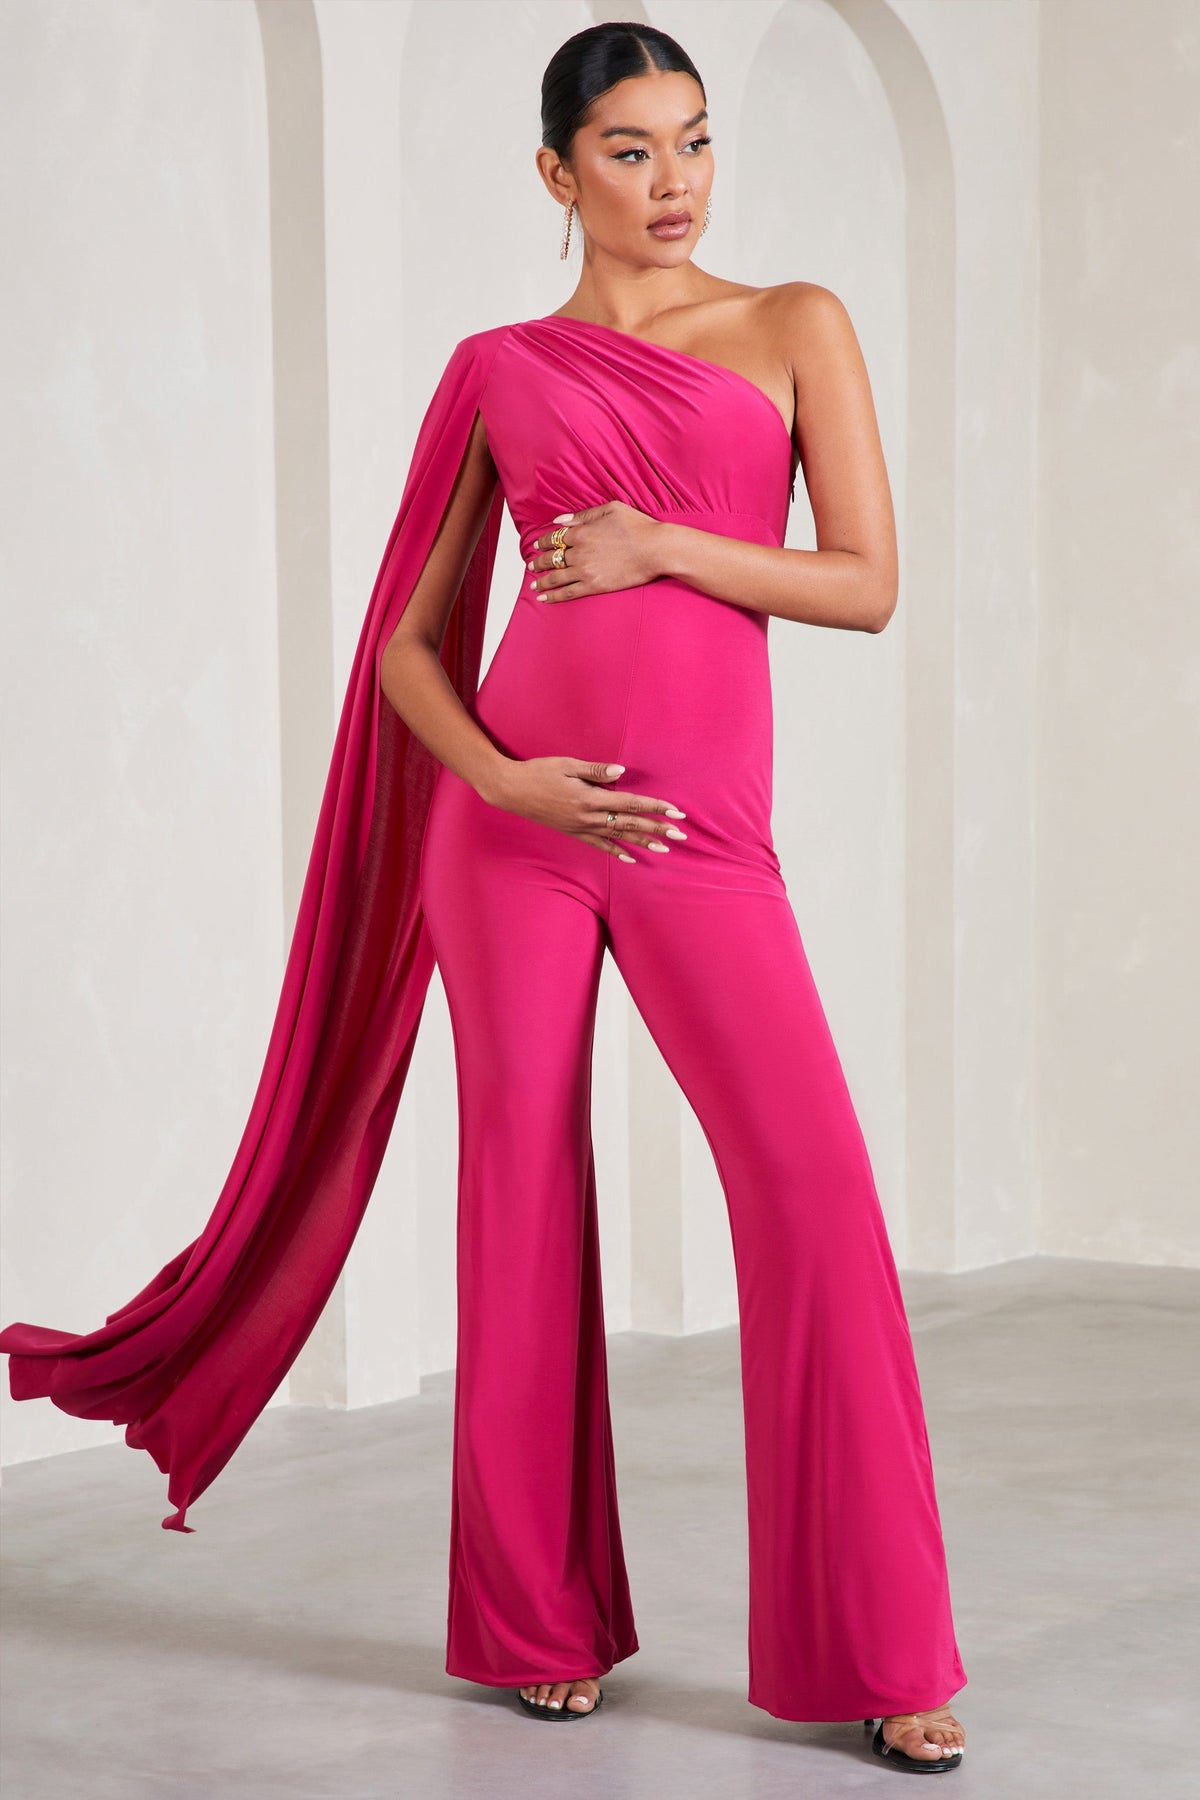 20 Best Amazon Maternity Outfits for the Holidays 2023